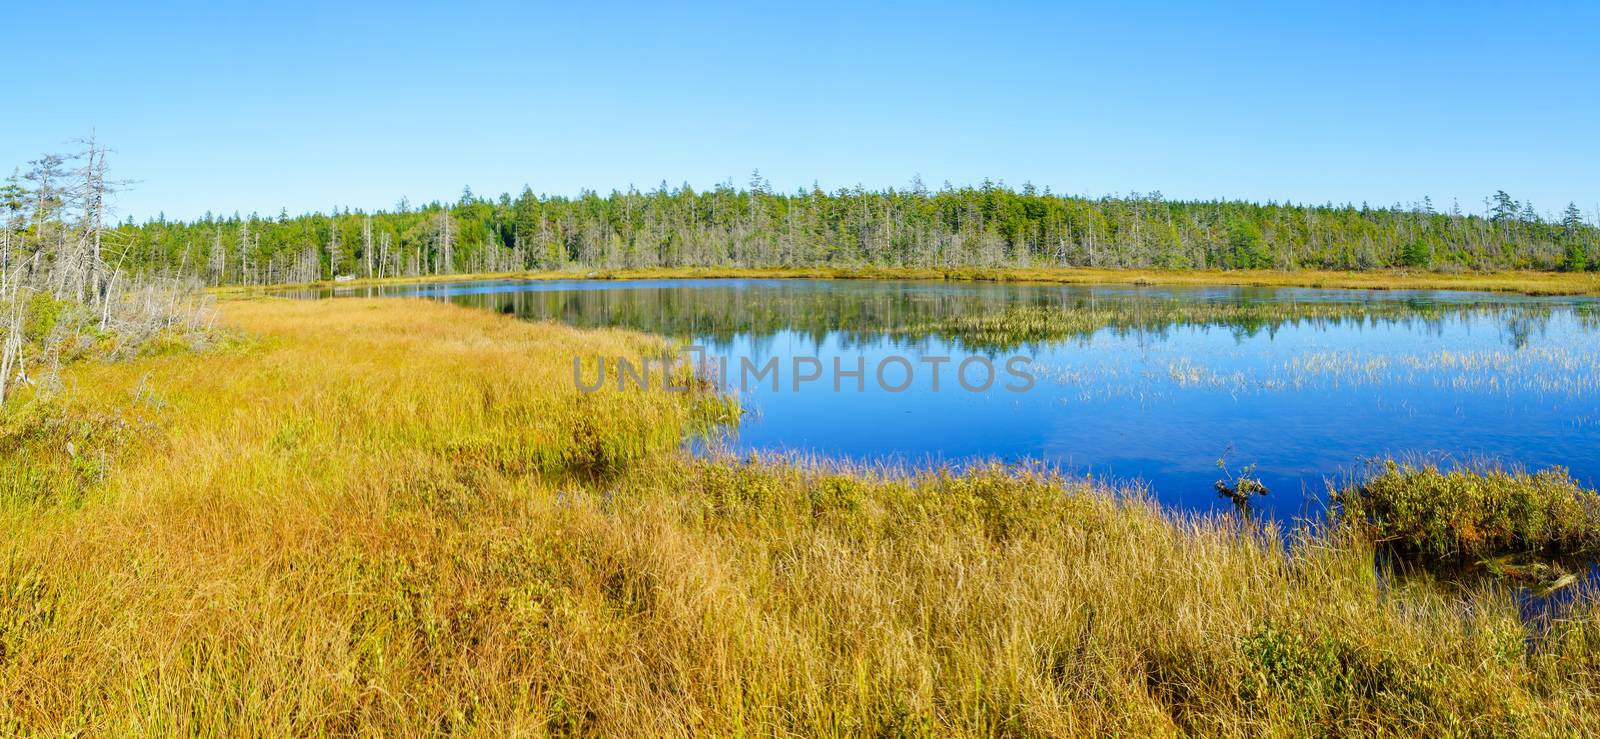 View of marshland in the Caribou Plain, Fundy National Park, New Brunswick, Canada